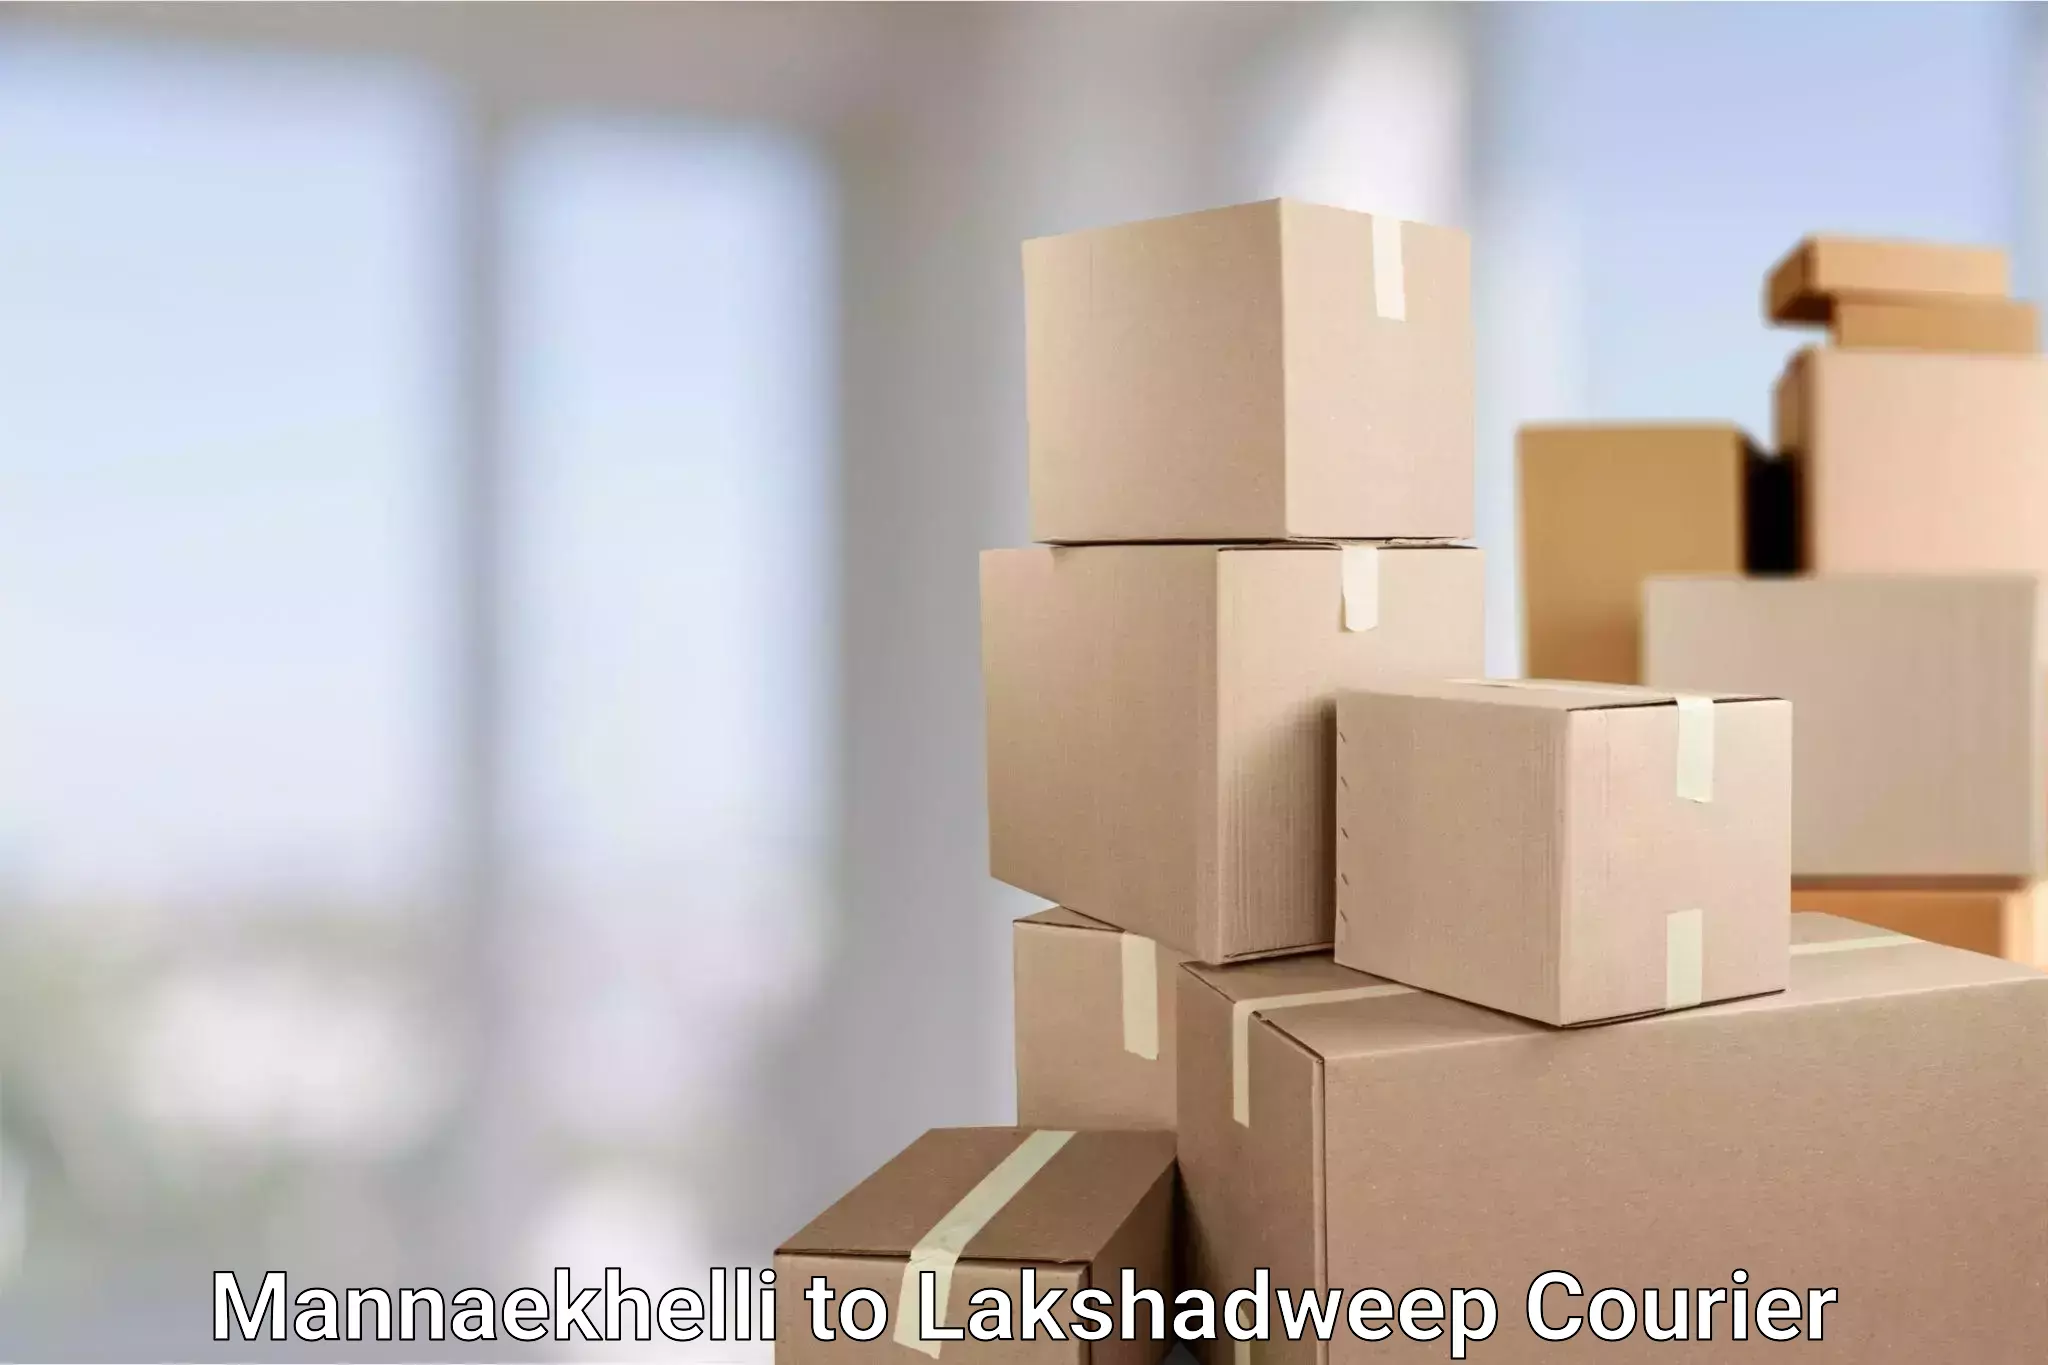 Business courier solutions Mannaekhelli to Lakshadweep